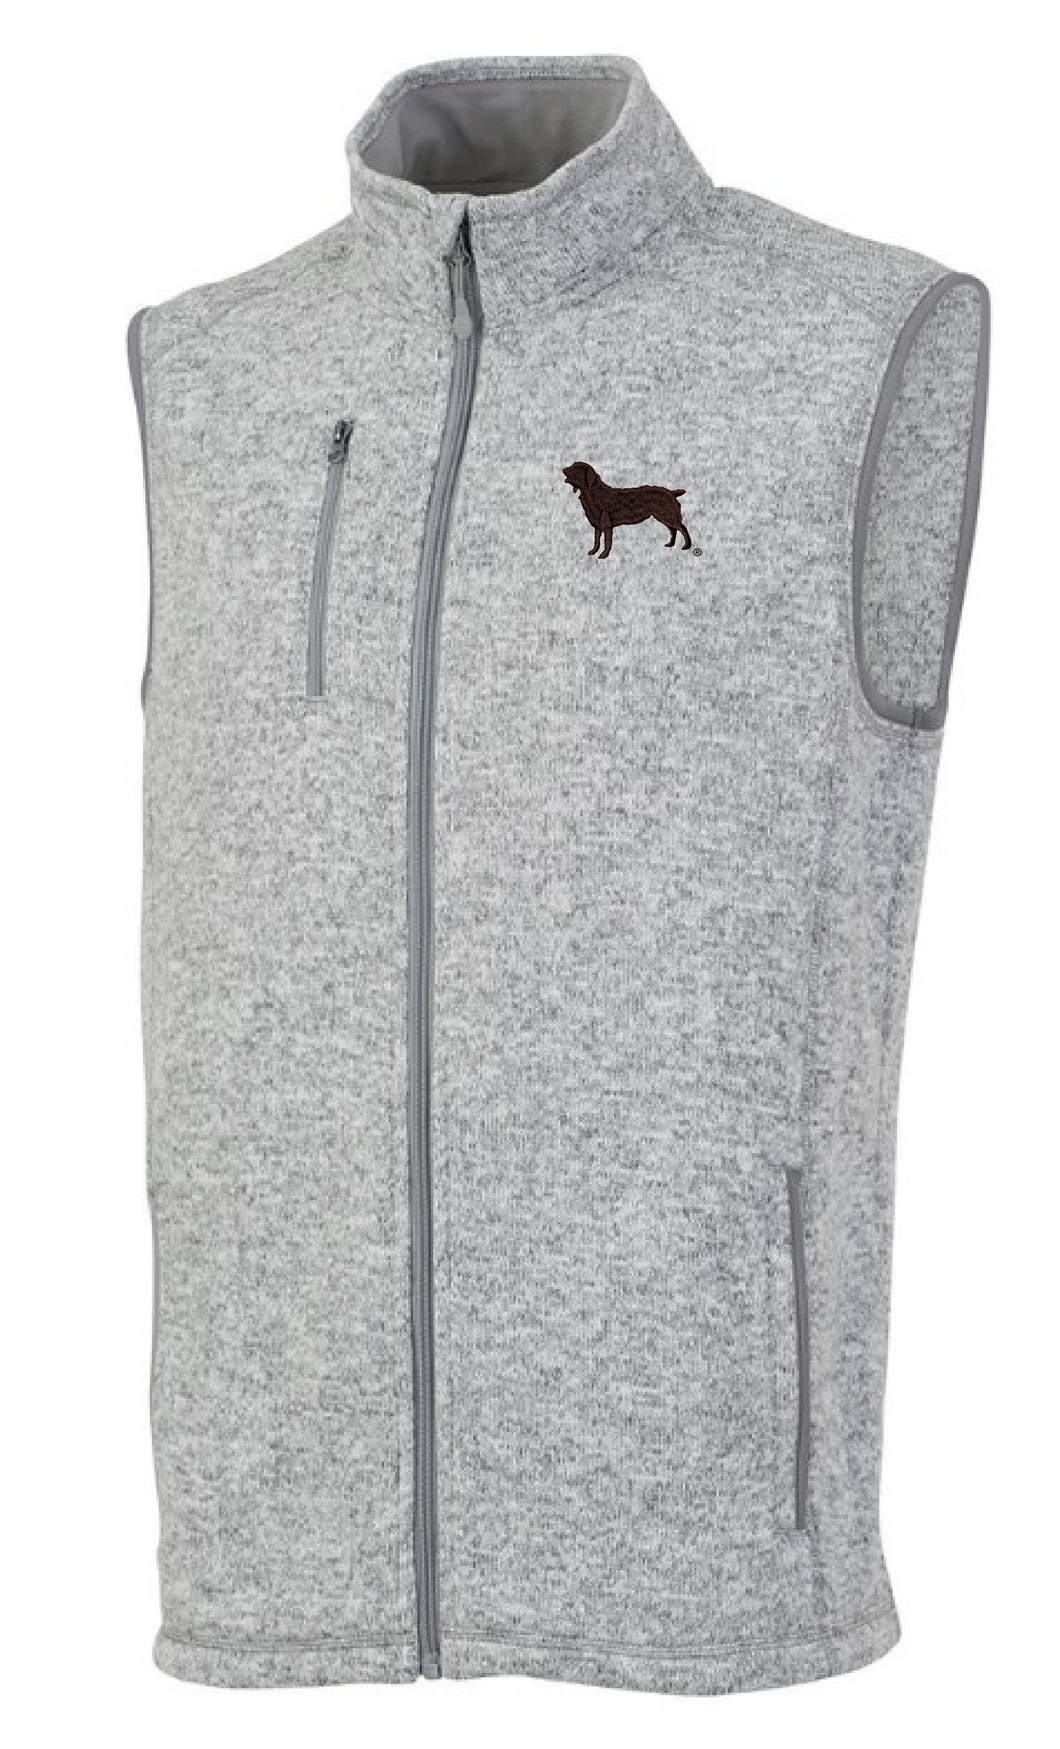 Men's Pacific Heathered Vest with Official Boykin Spaniel Society Silhouette (2 colors)